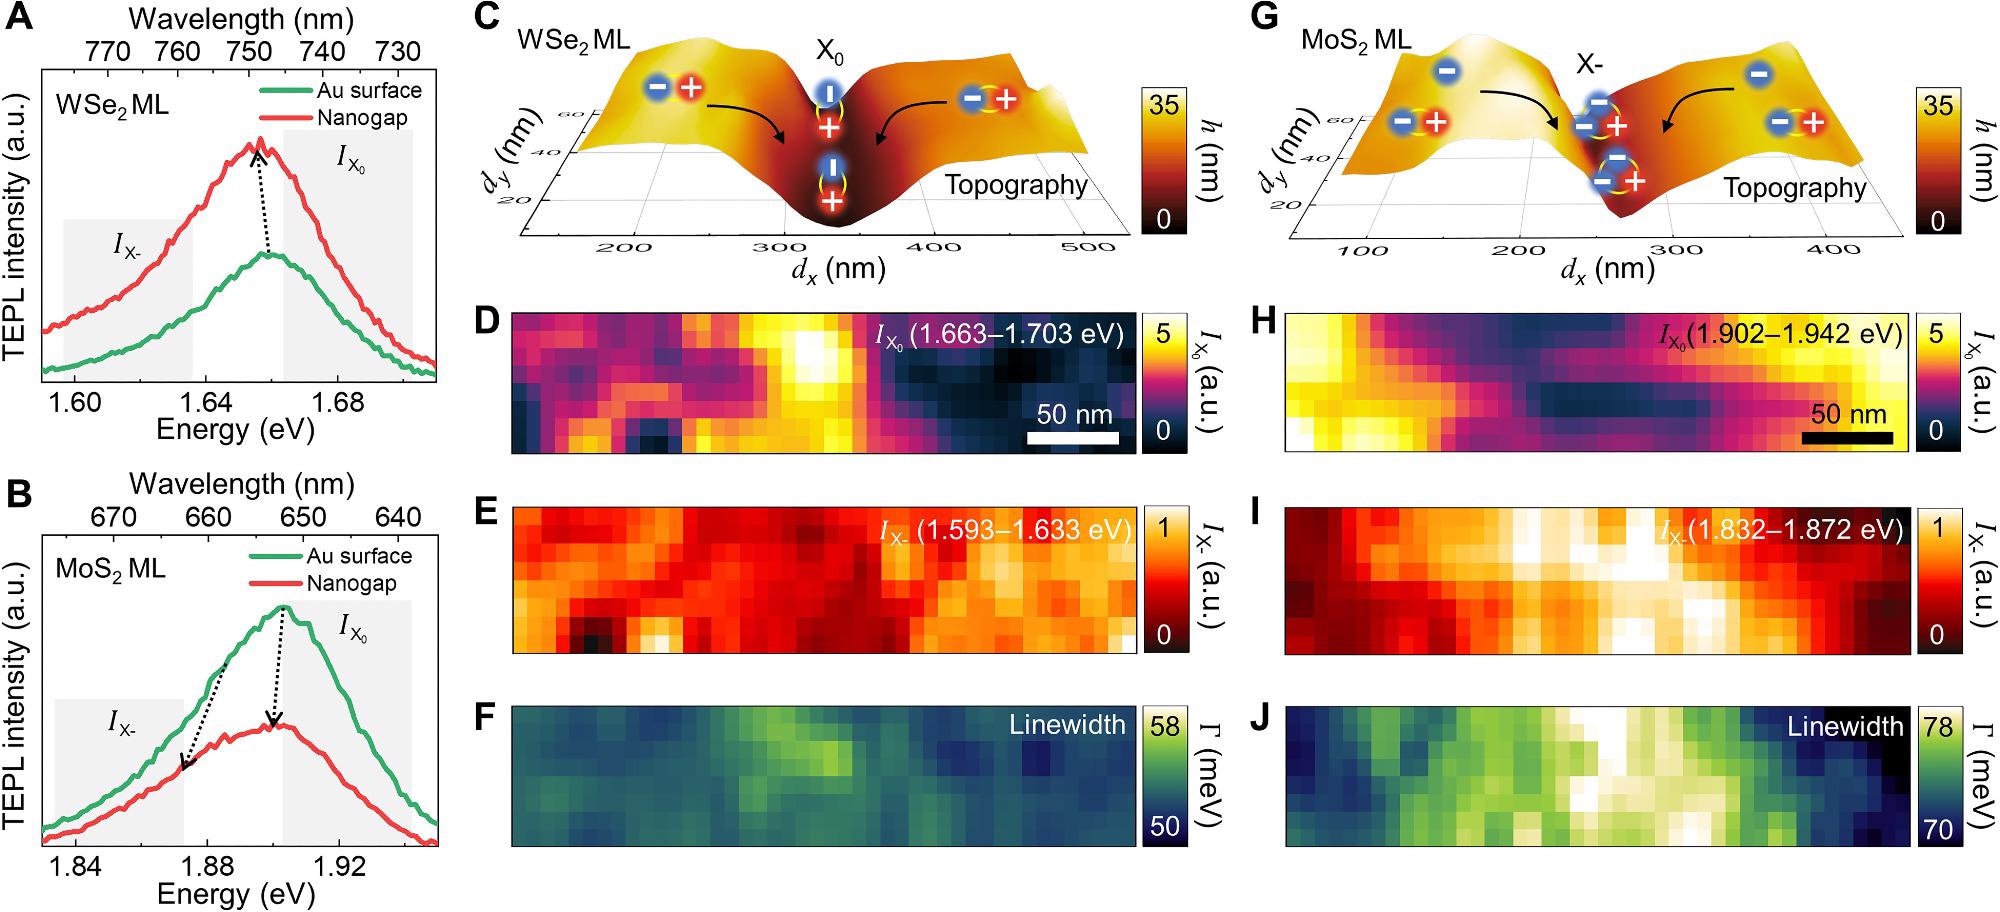 Hyperspectral TEPL imaging of TMD MLs at the nanogap. TEPL spectra of WSe2 (A) and MoS2 (B) MLs at the Au surface (green) and the nanogap (red) regions. (C to F) Hyperspectral TEPL images of a WSe2 ML. AFM topography image with a description of exciton funneling (C). TEPL images of the spectrally integrated intensity of excitons (D) [spectral region of IX0 in (A)] and low-energy shoulder (E) [spectral region of IX- in (A) after normalization]. TEPL image of spectral linewidth (F). (G to J) Hyperspectral TEPL images of a MoS2 ML. AFM topography image with a description of electron funneling and trion (X-) conversion (G). TEPL images of the spectrally integrated intensity of excitons (H) [spectral region of IX0 in (B)] and low-energy shoulder (I) [spectral region of IX- in (B) after normalization]. TEPL image of spectral linewidth (J).